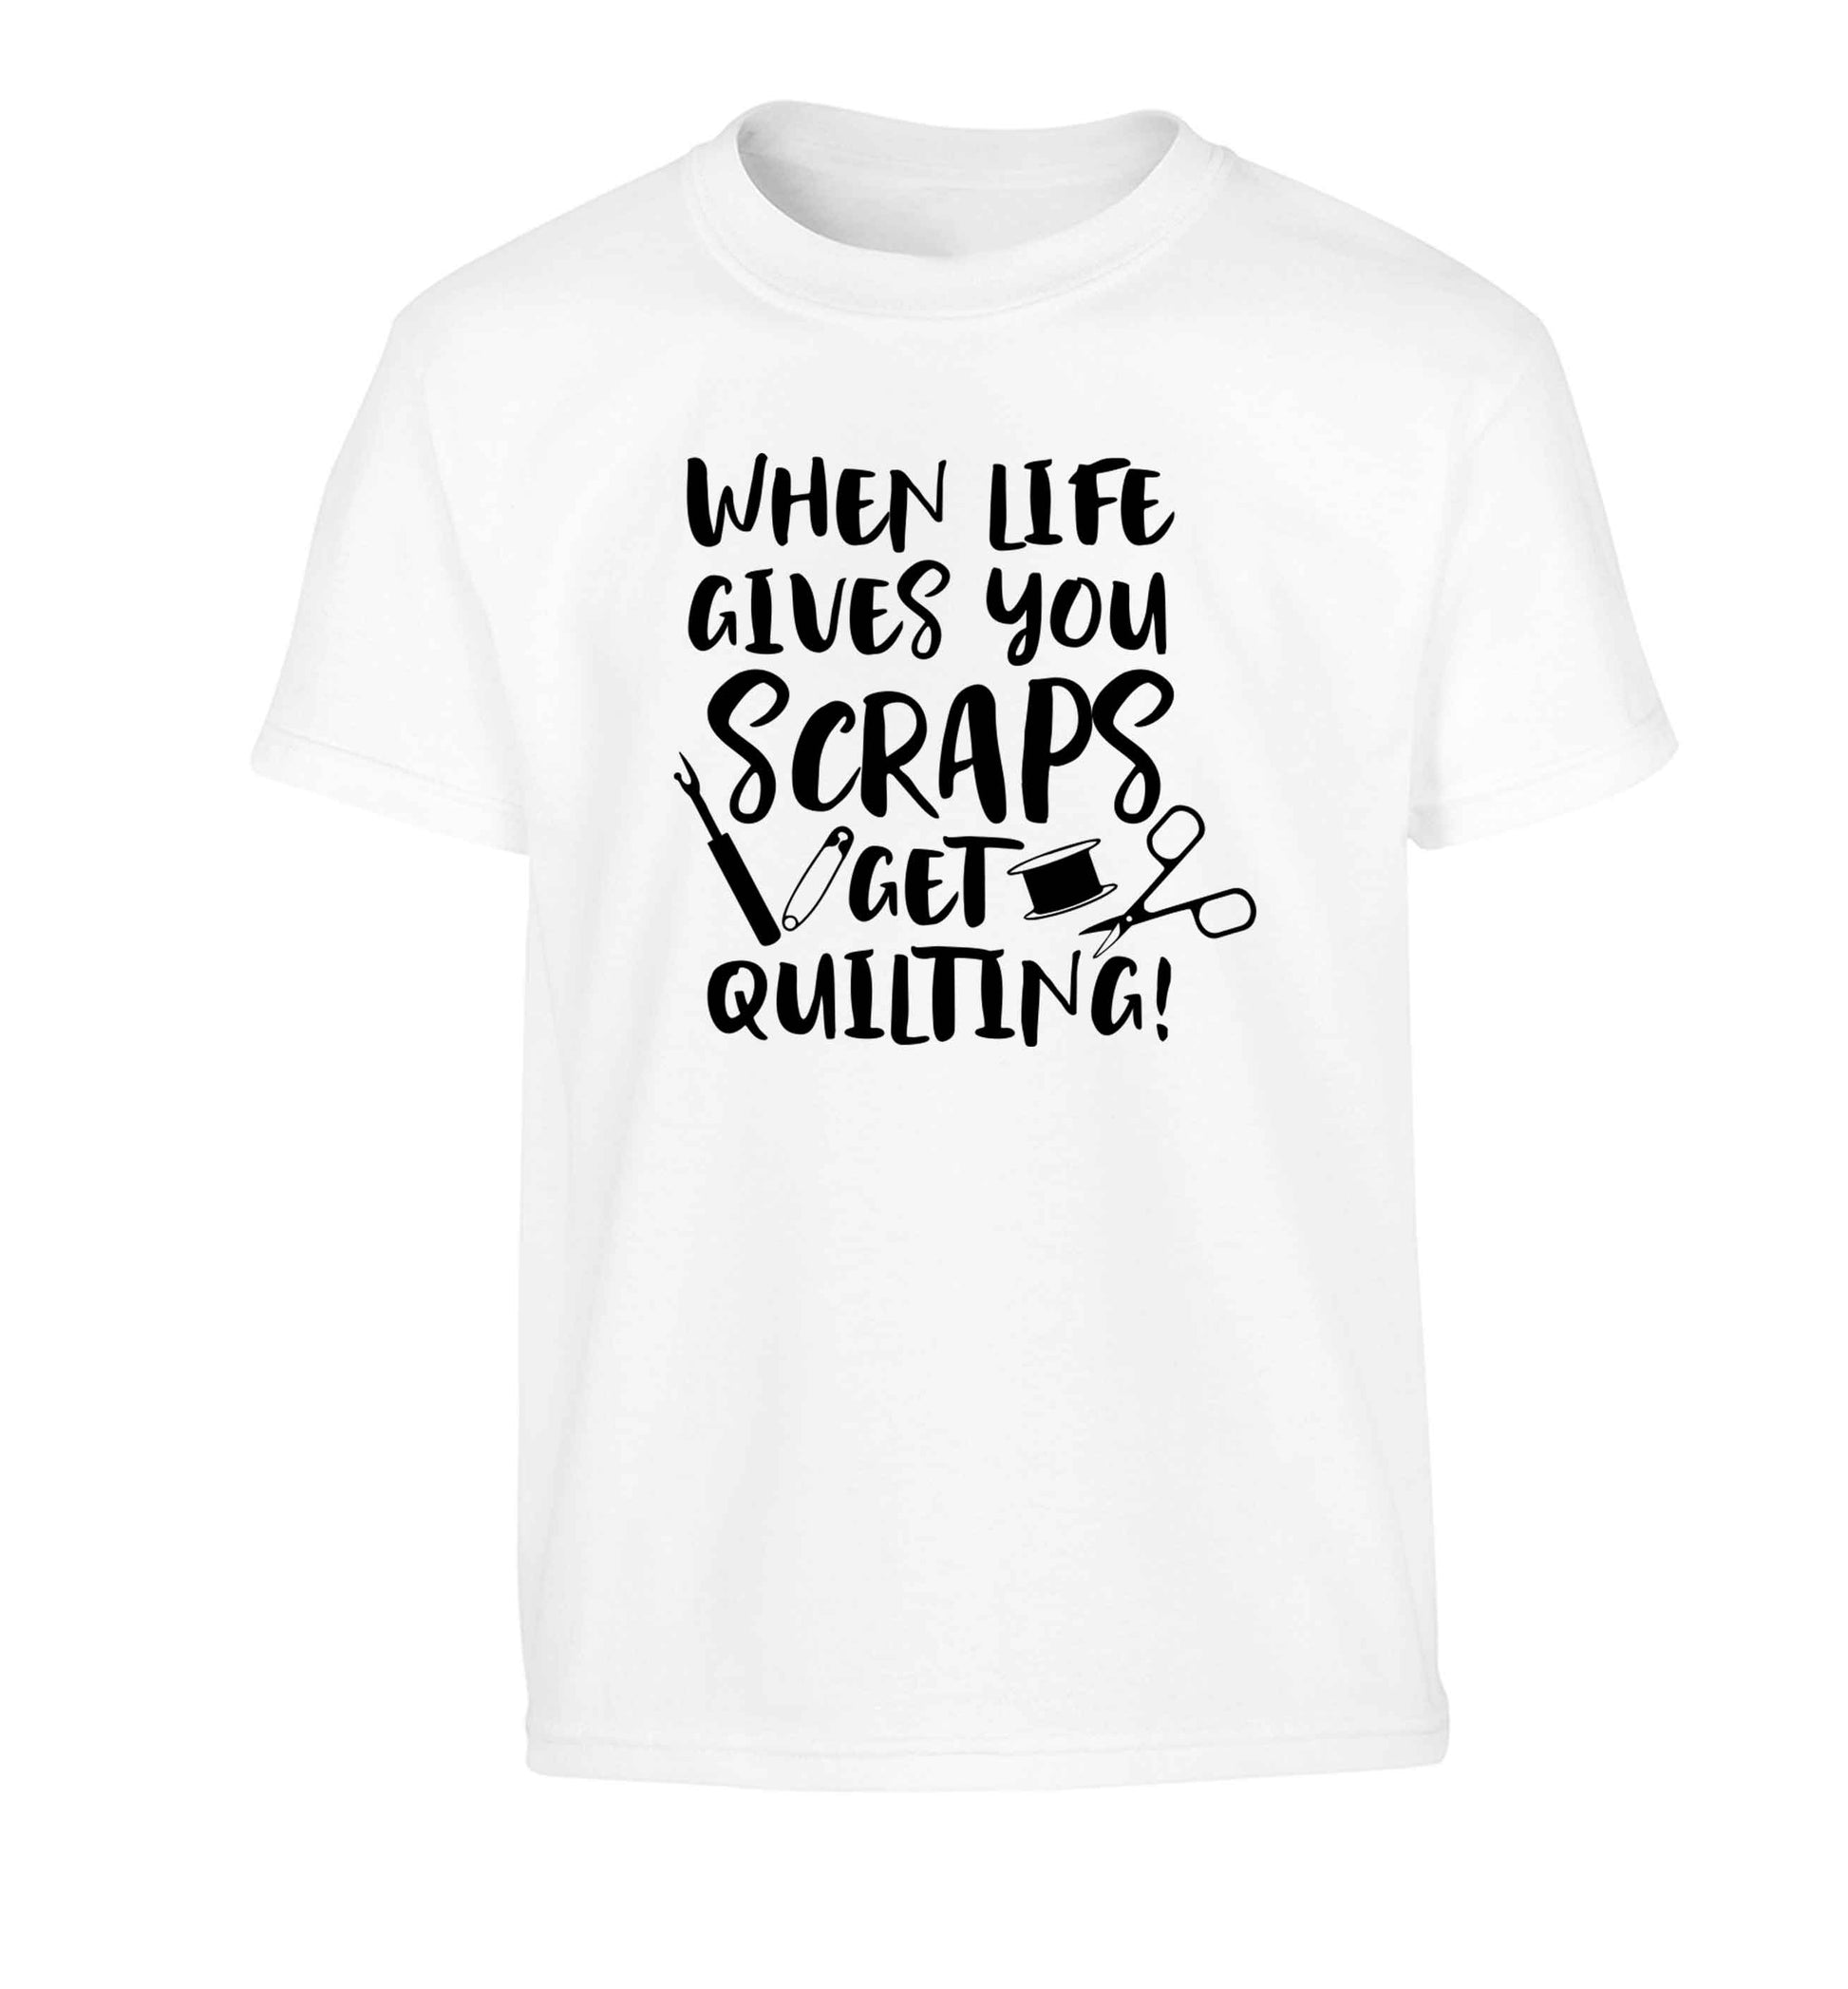 When life gives you scraps get quilting! Children's white Tshirt 12-13 Years